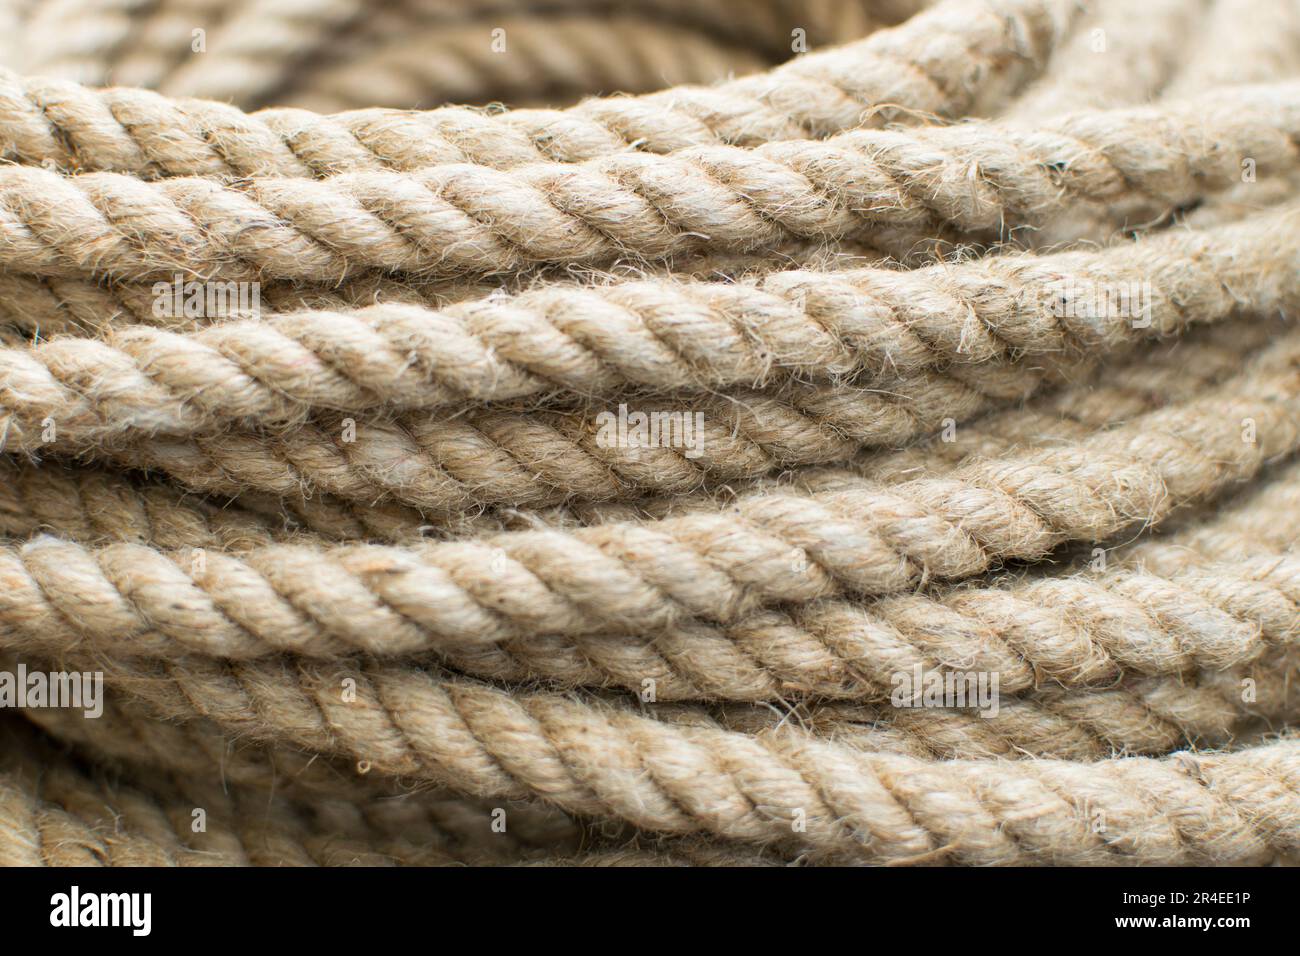 Roll of hemp thick string stock image. Image of reflection - 13436361